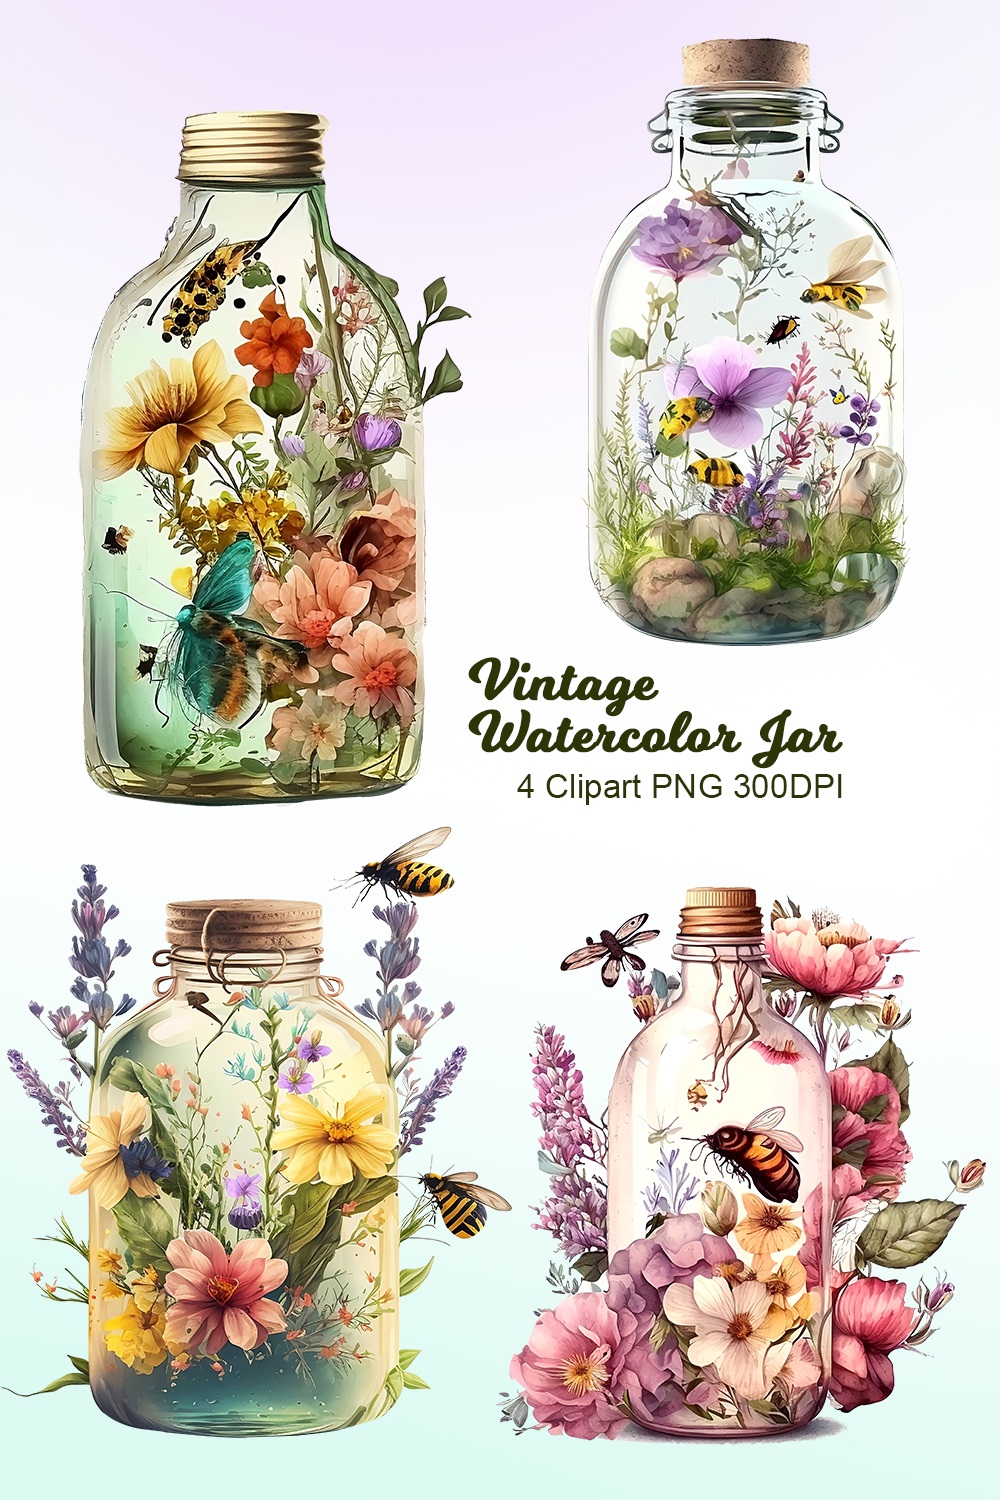 Beautiful Vintage Floral Watercolor Jar Clipart with transparent background pinterest preview image.